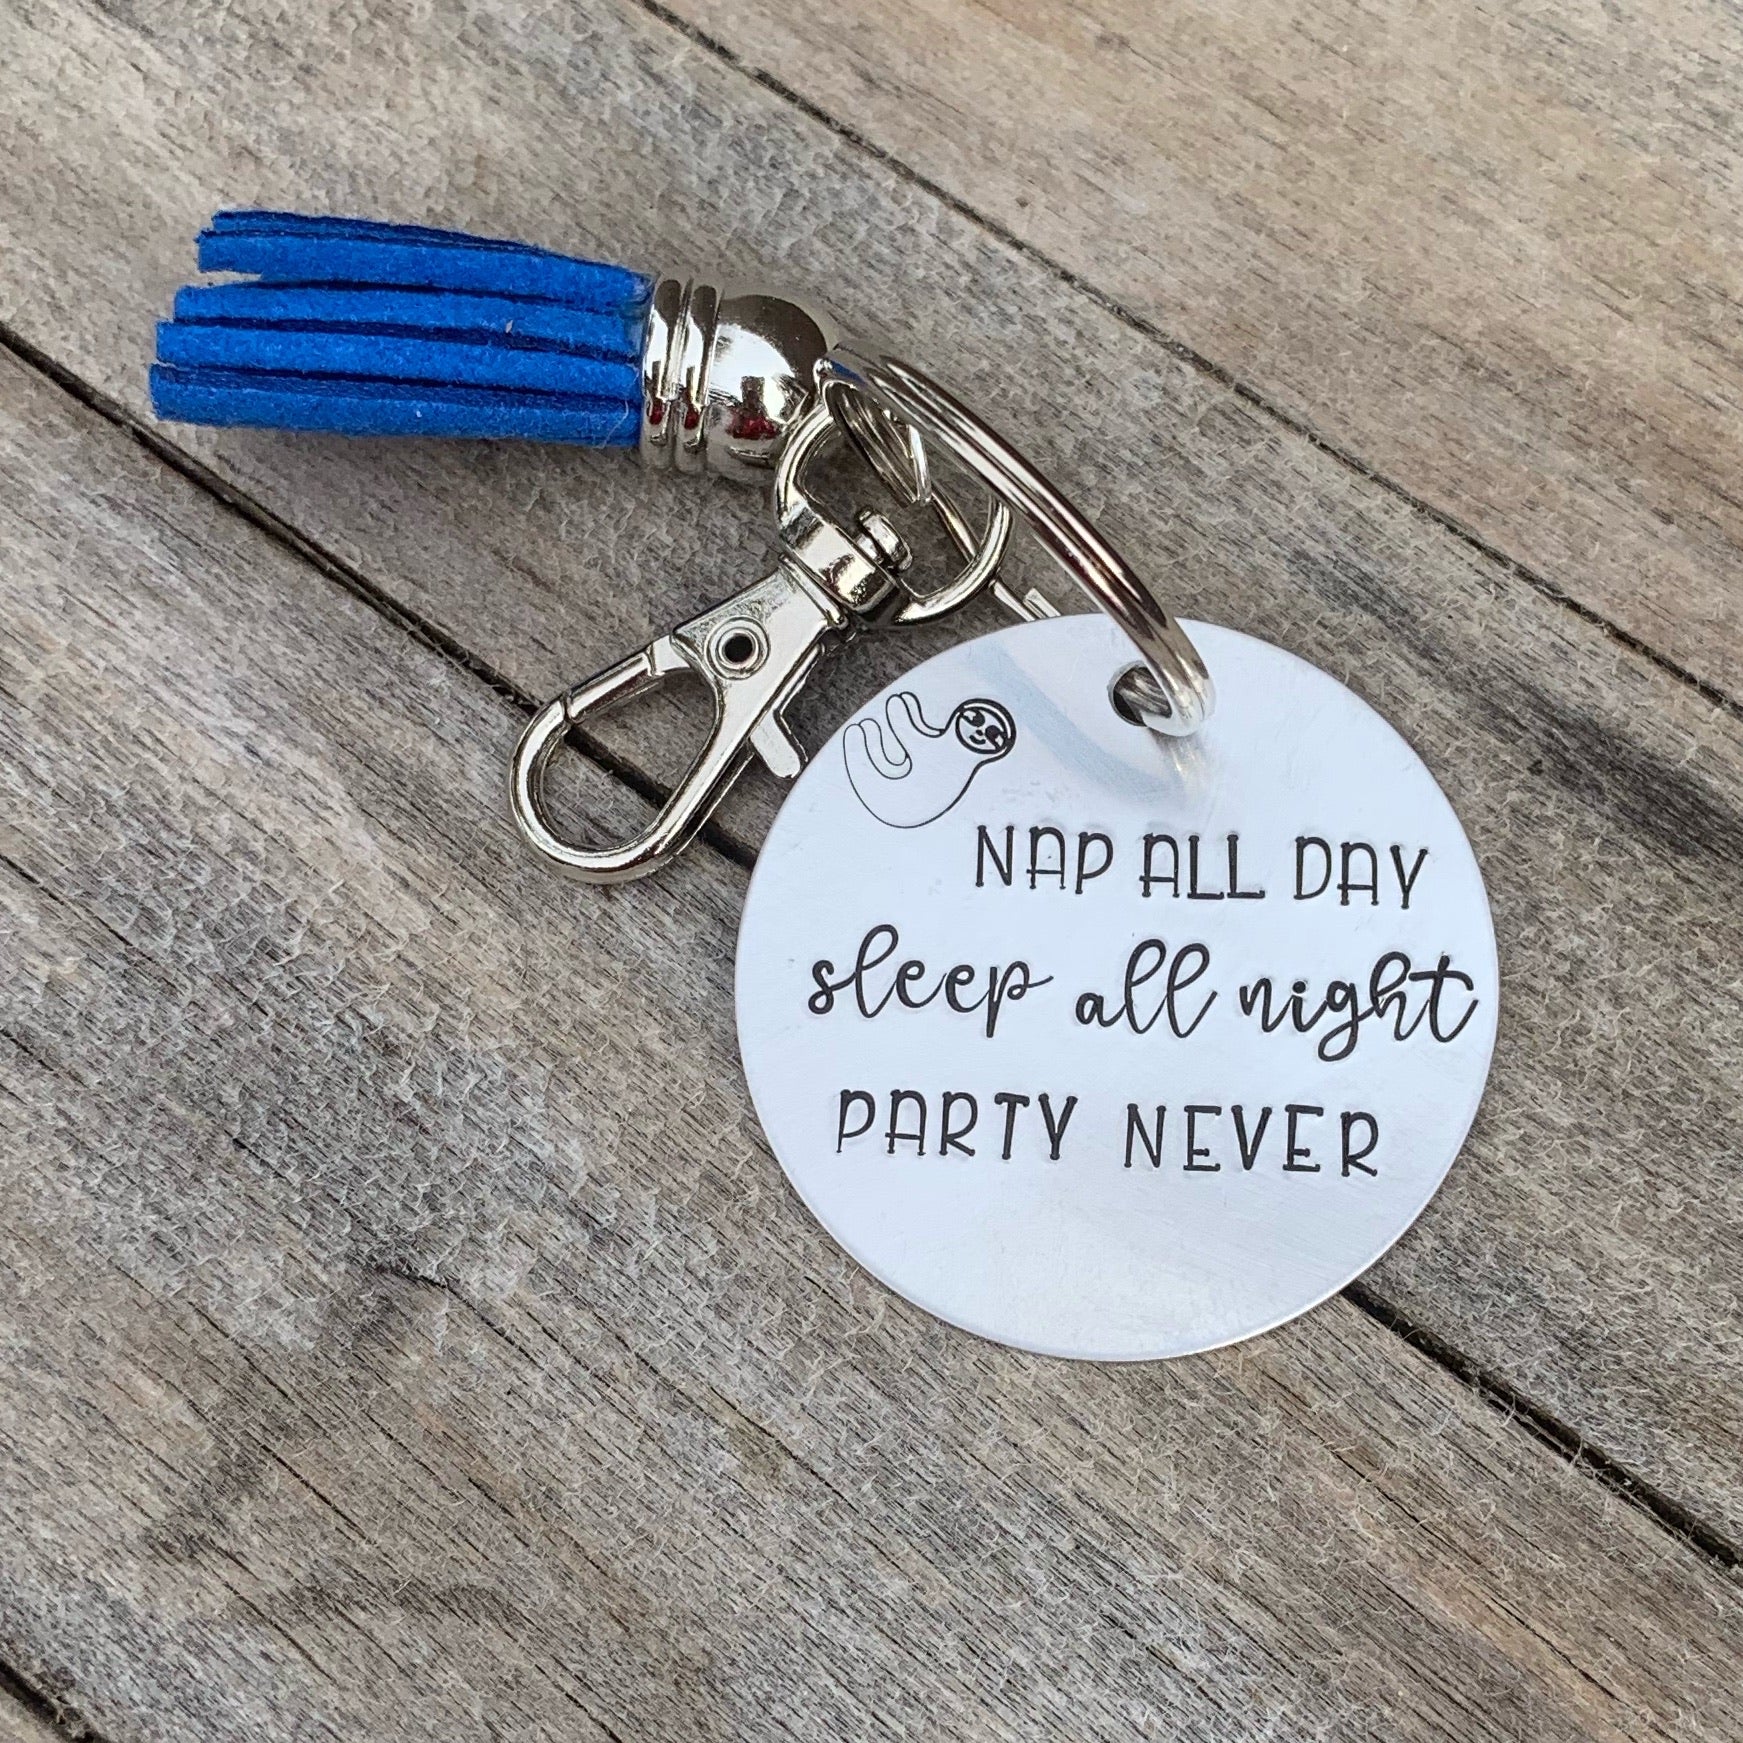 Key chain - Circle Shape - Nap all day. Sleep all night. Party never